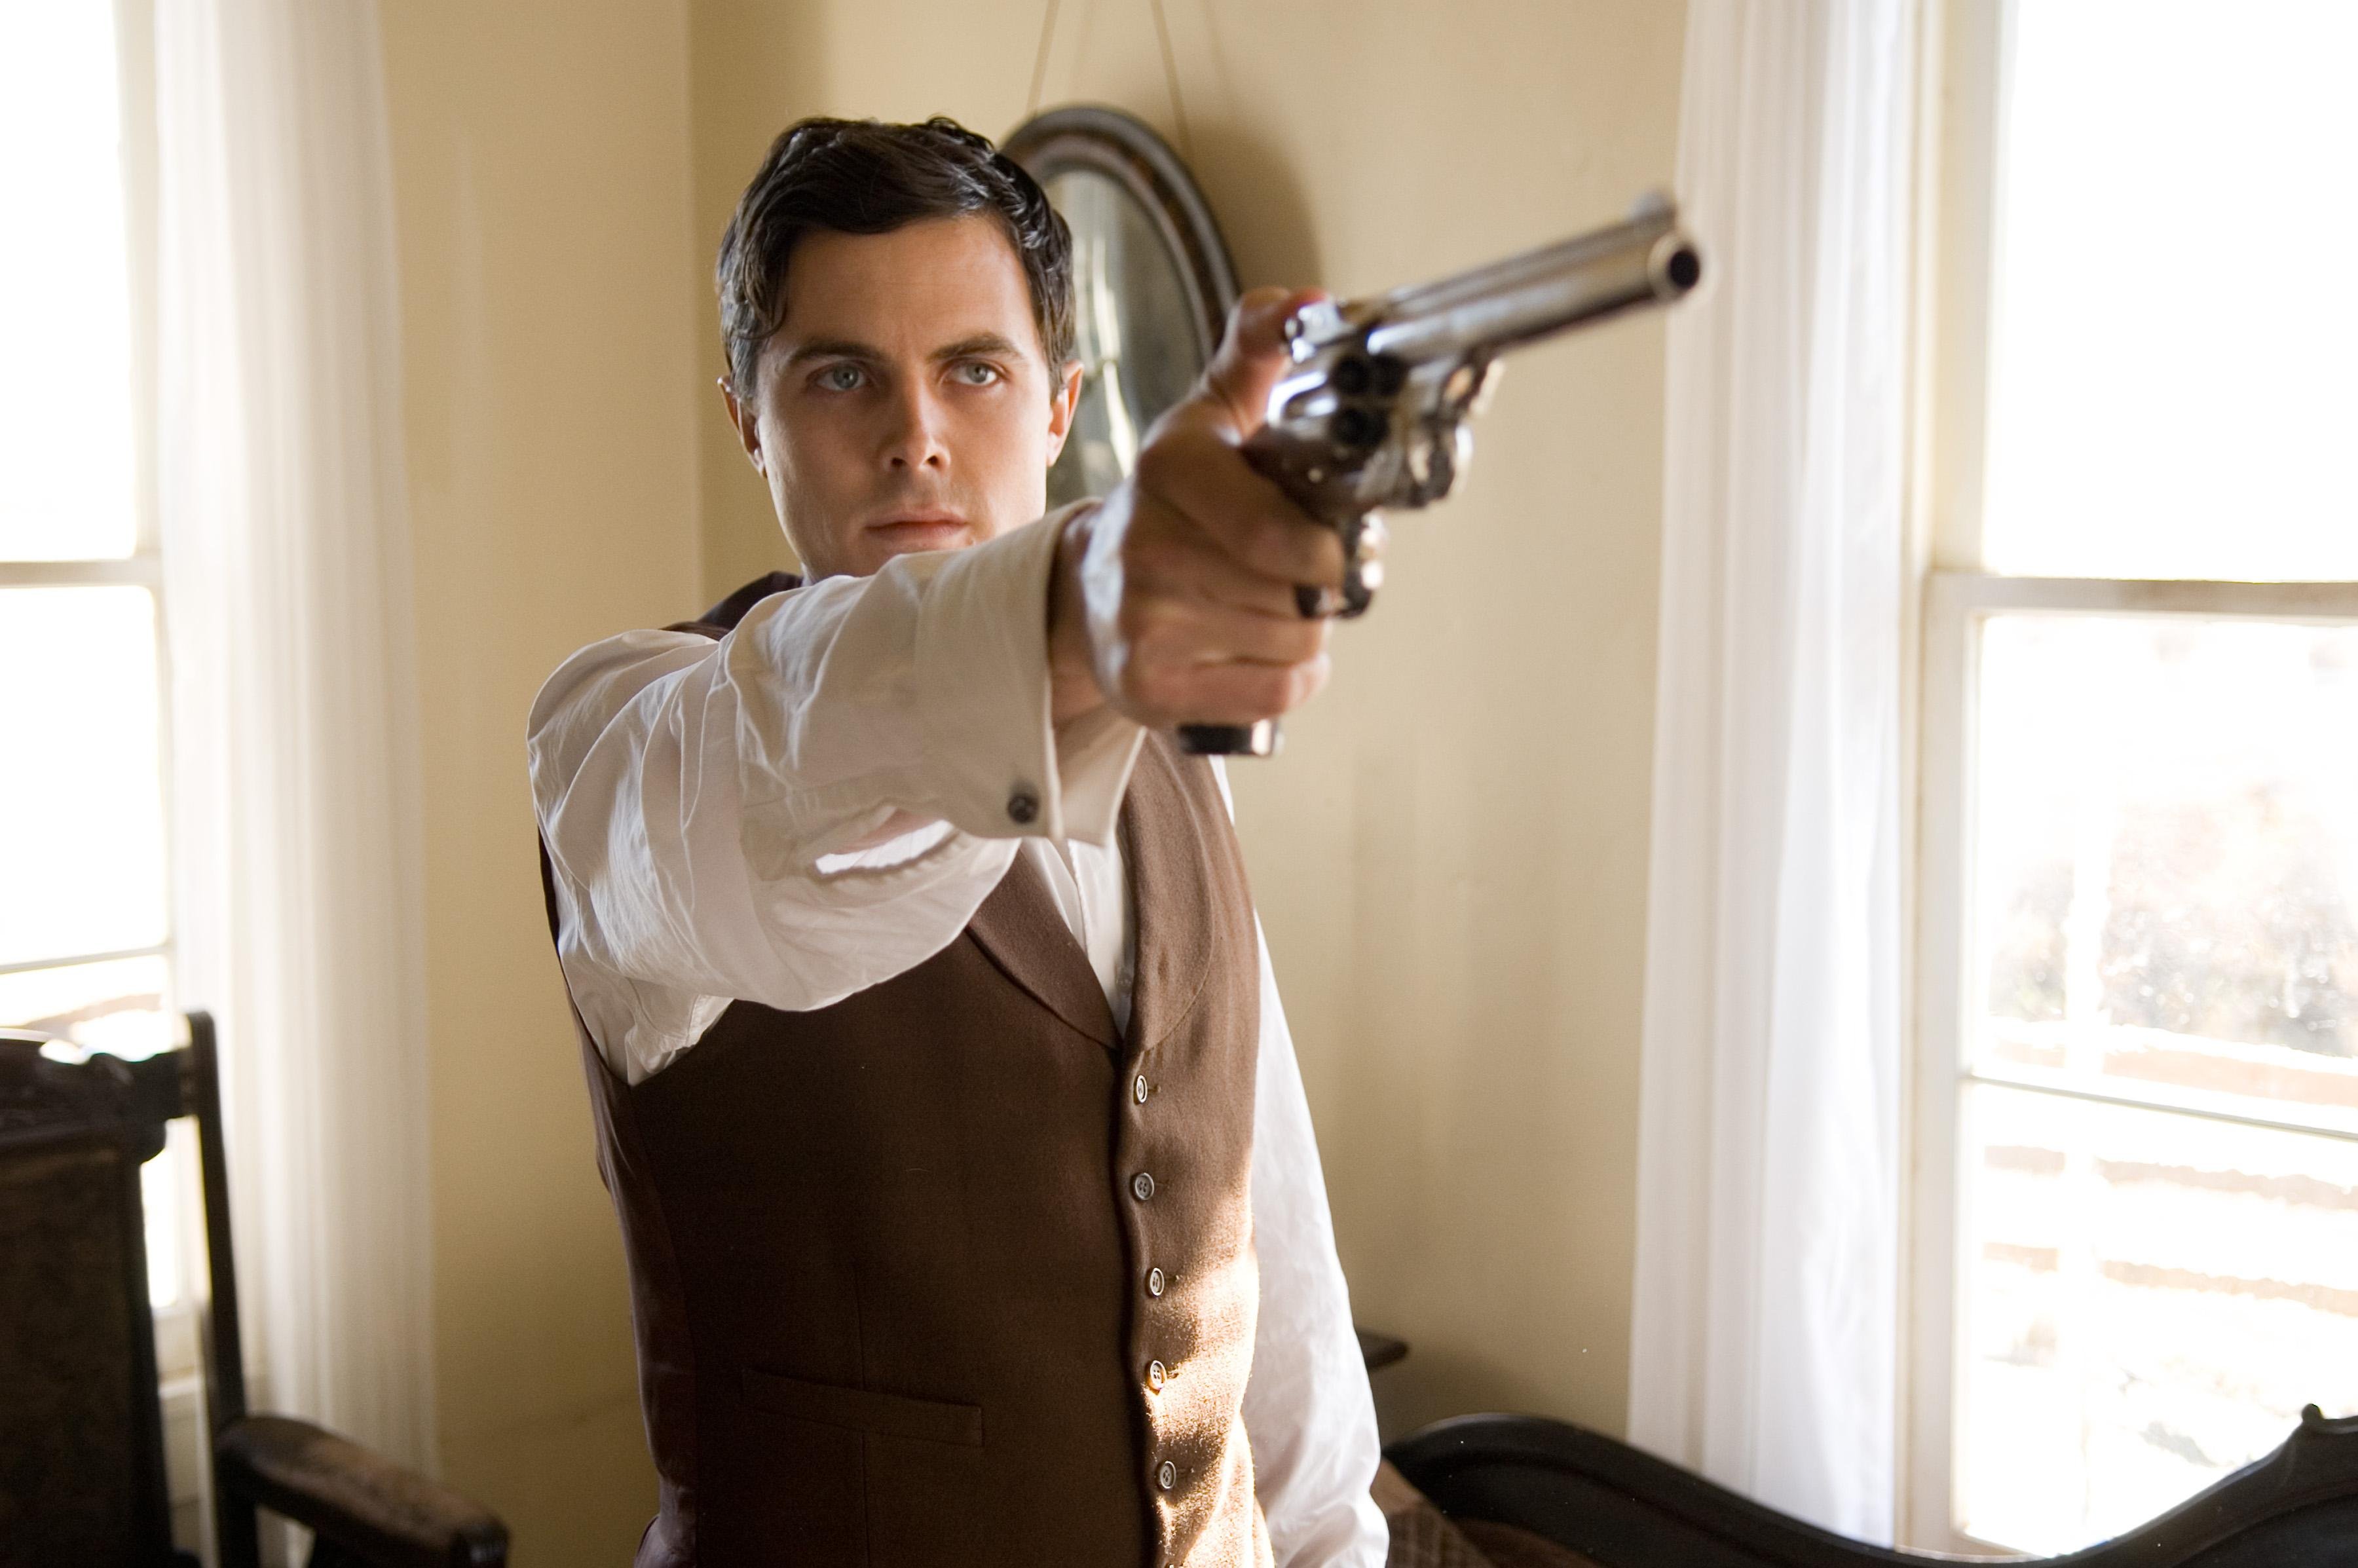 The Assassination Of Jesse James By The Coward Robert Ford Pics, Movie Collection